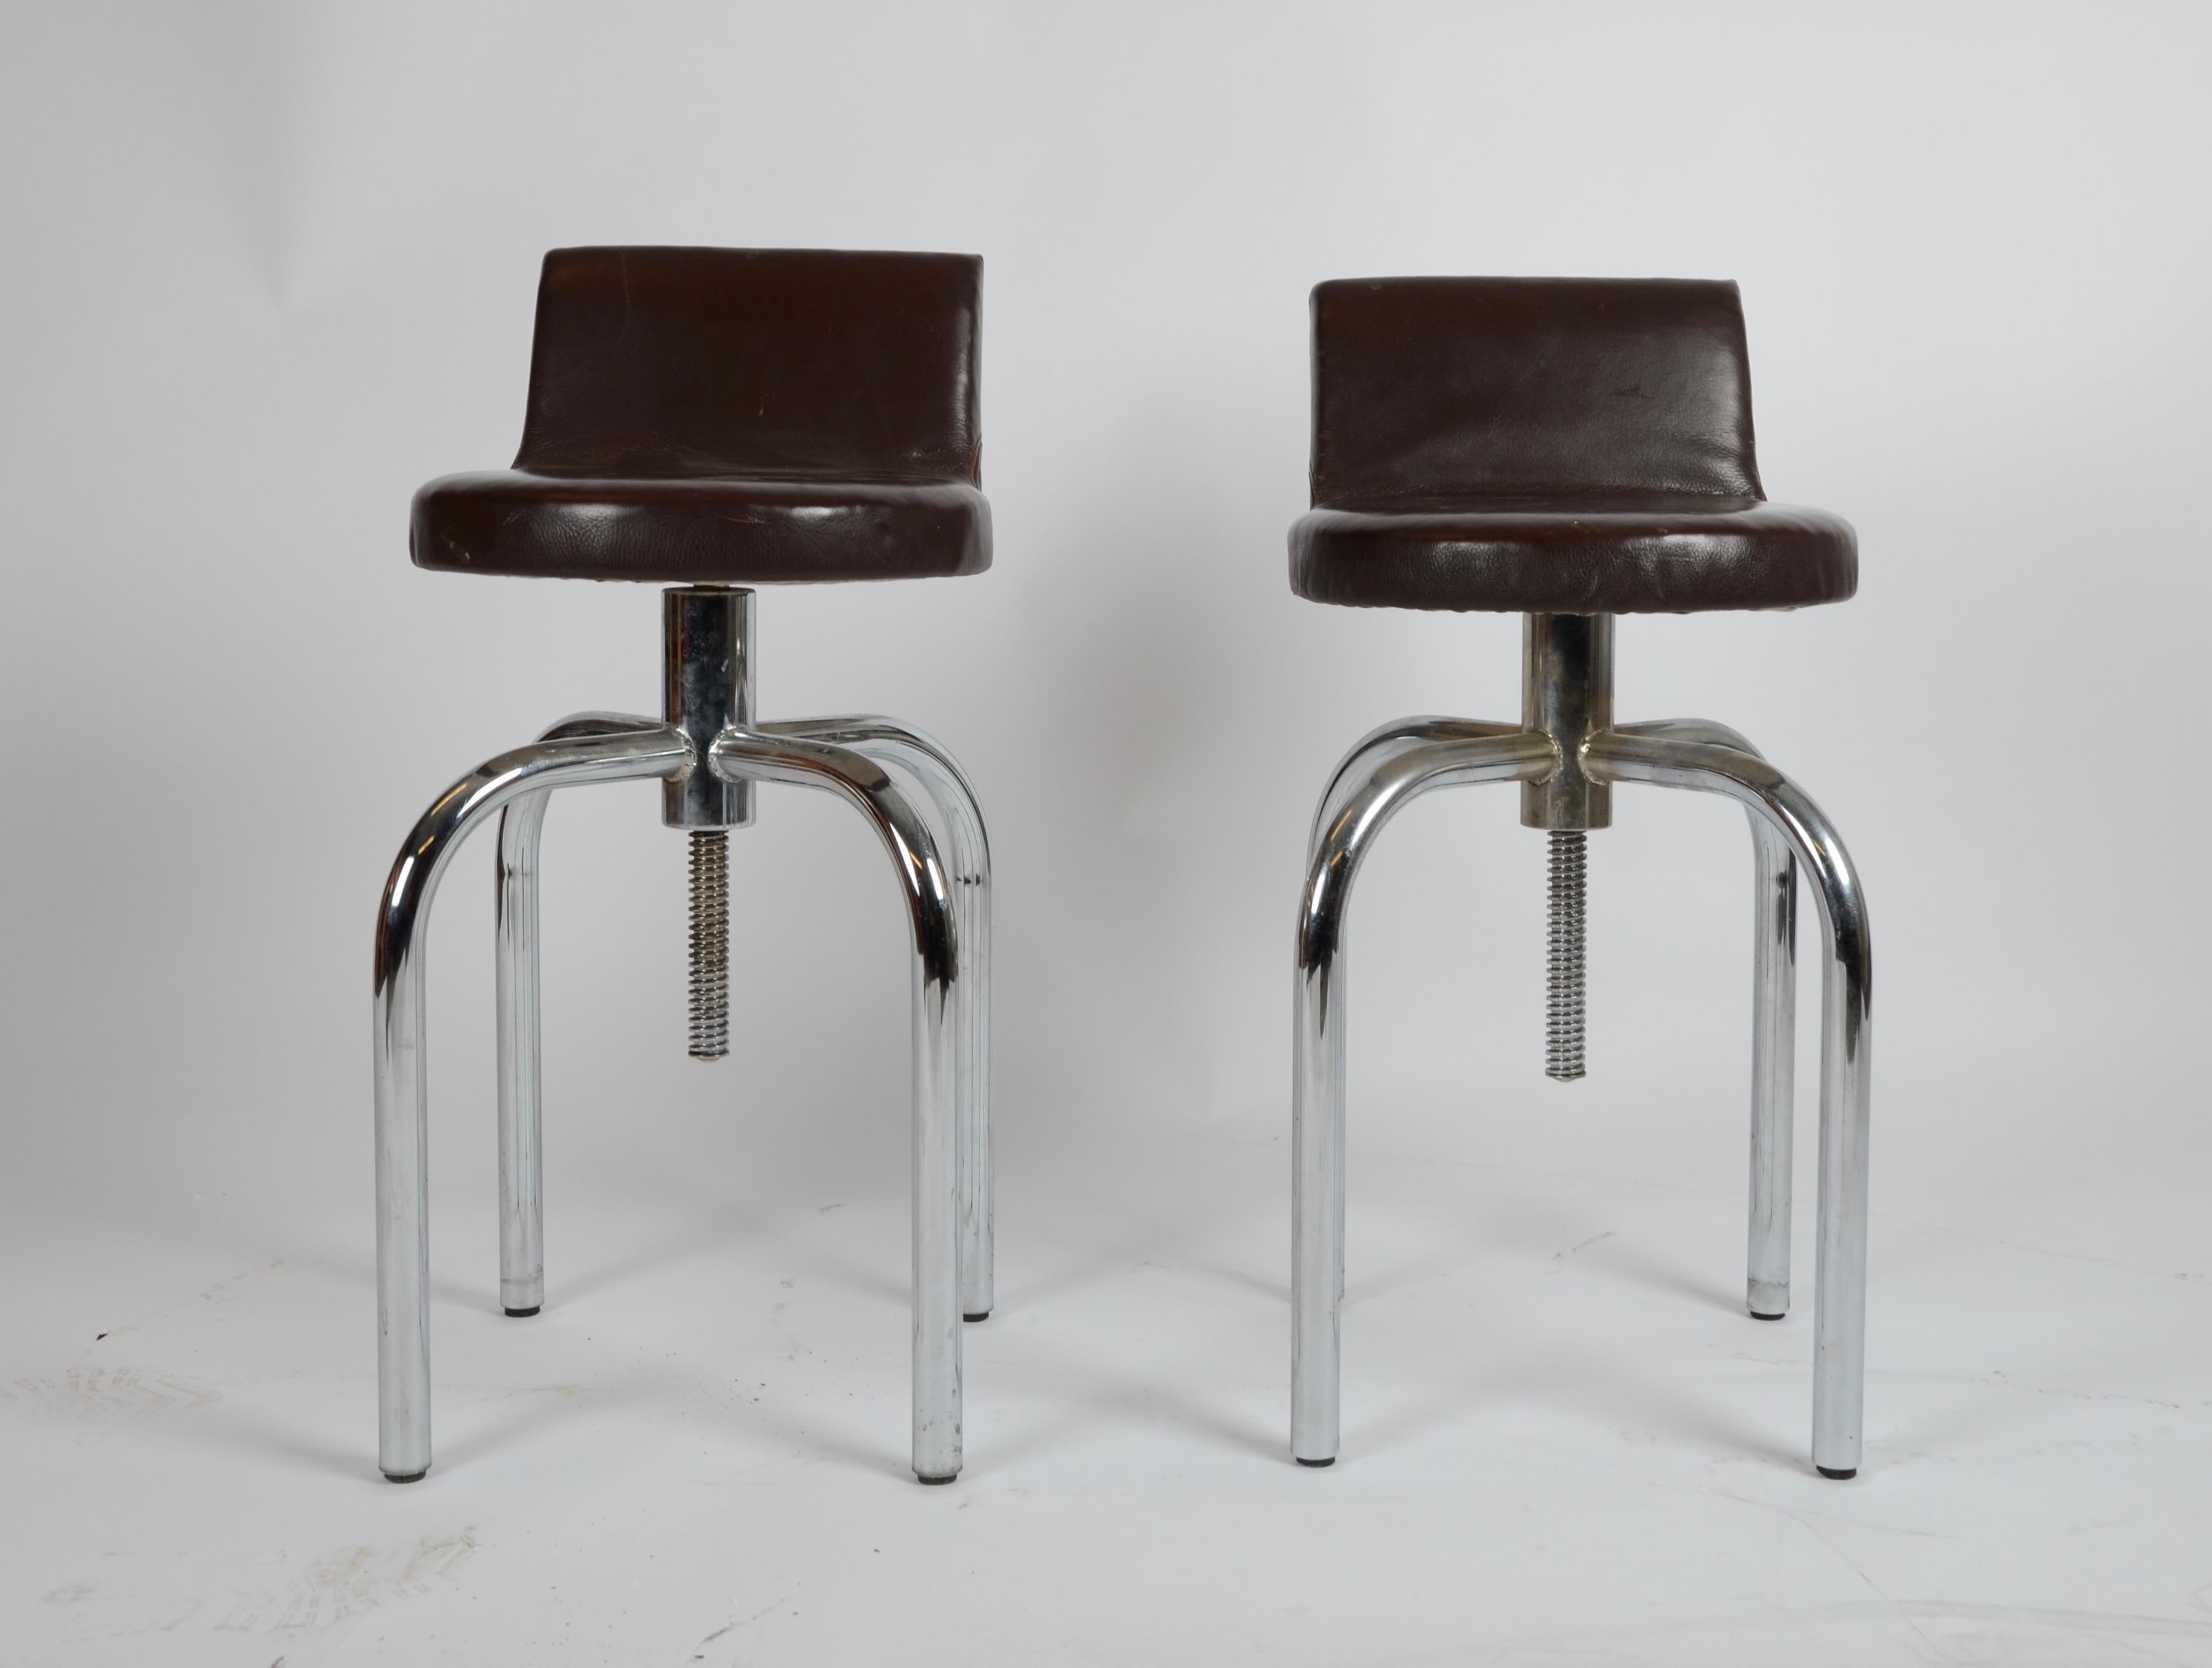 A pair of stools with low back, in leather, brass nails and steel. Designed by Gunnar Asplund. These are manufactured circa 1980s.

Measures: Height 61-77 cm, seat height 48-64 cm.